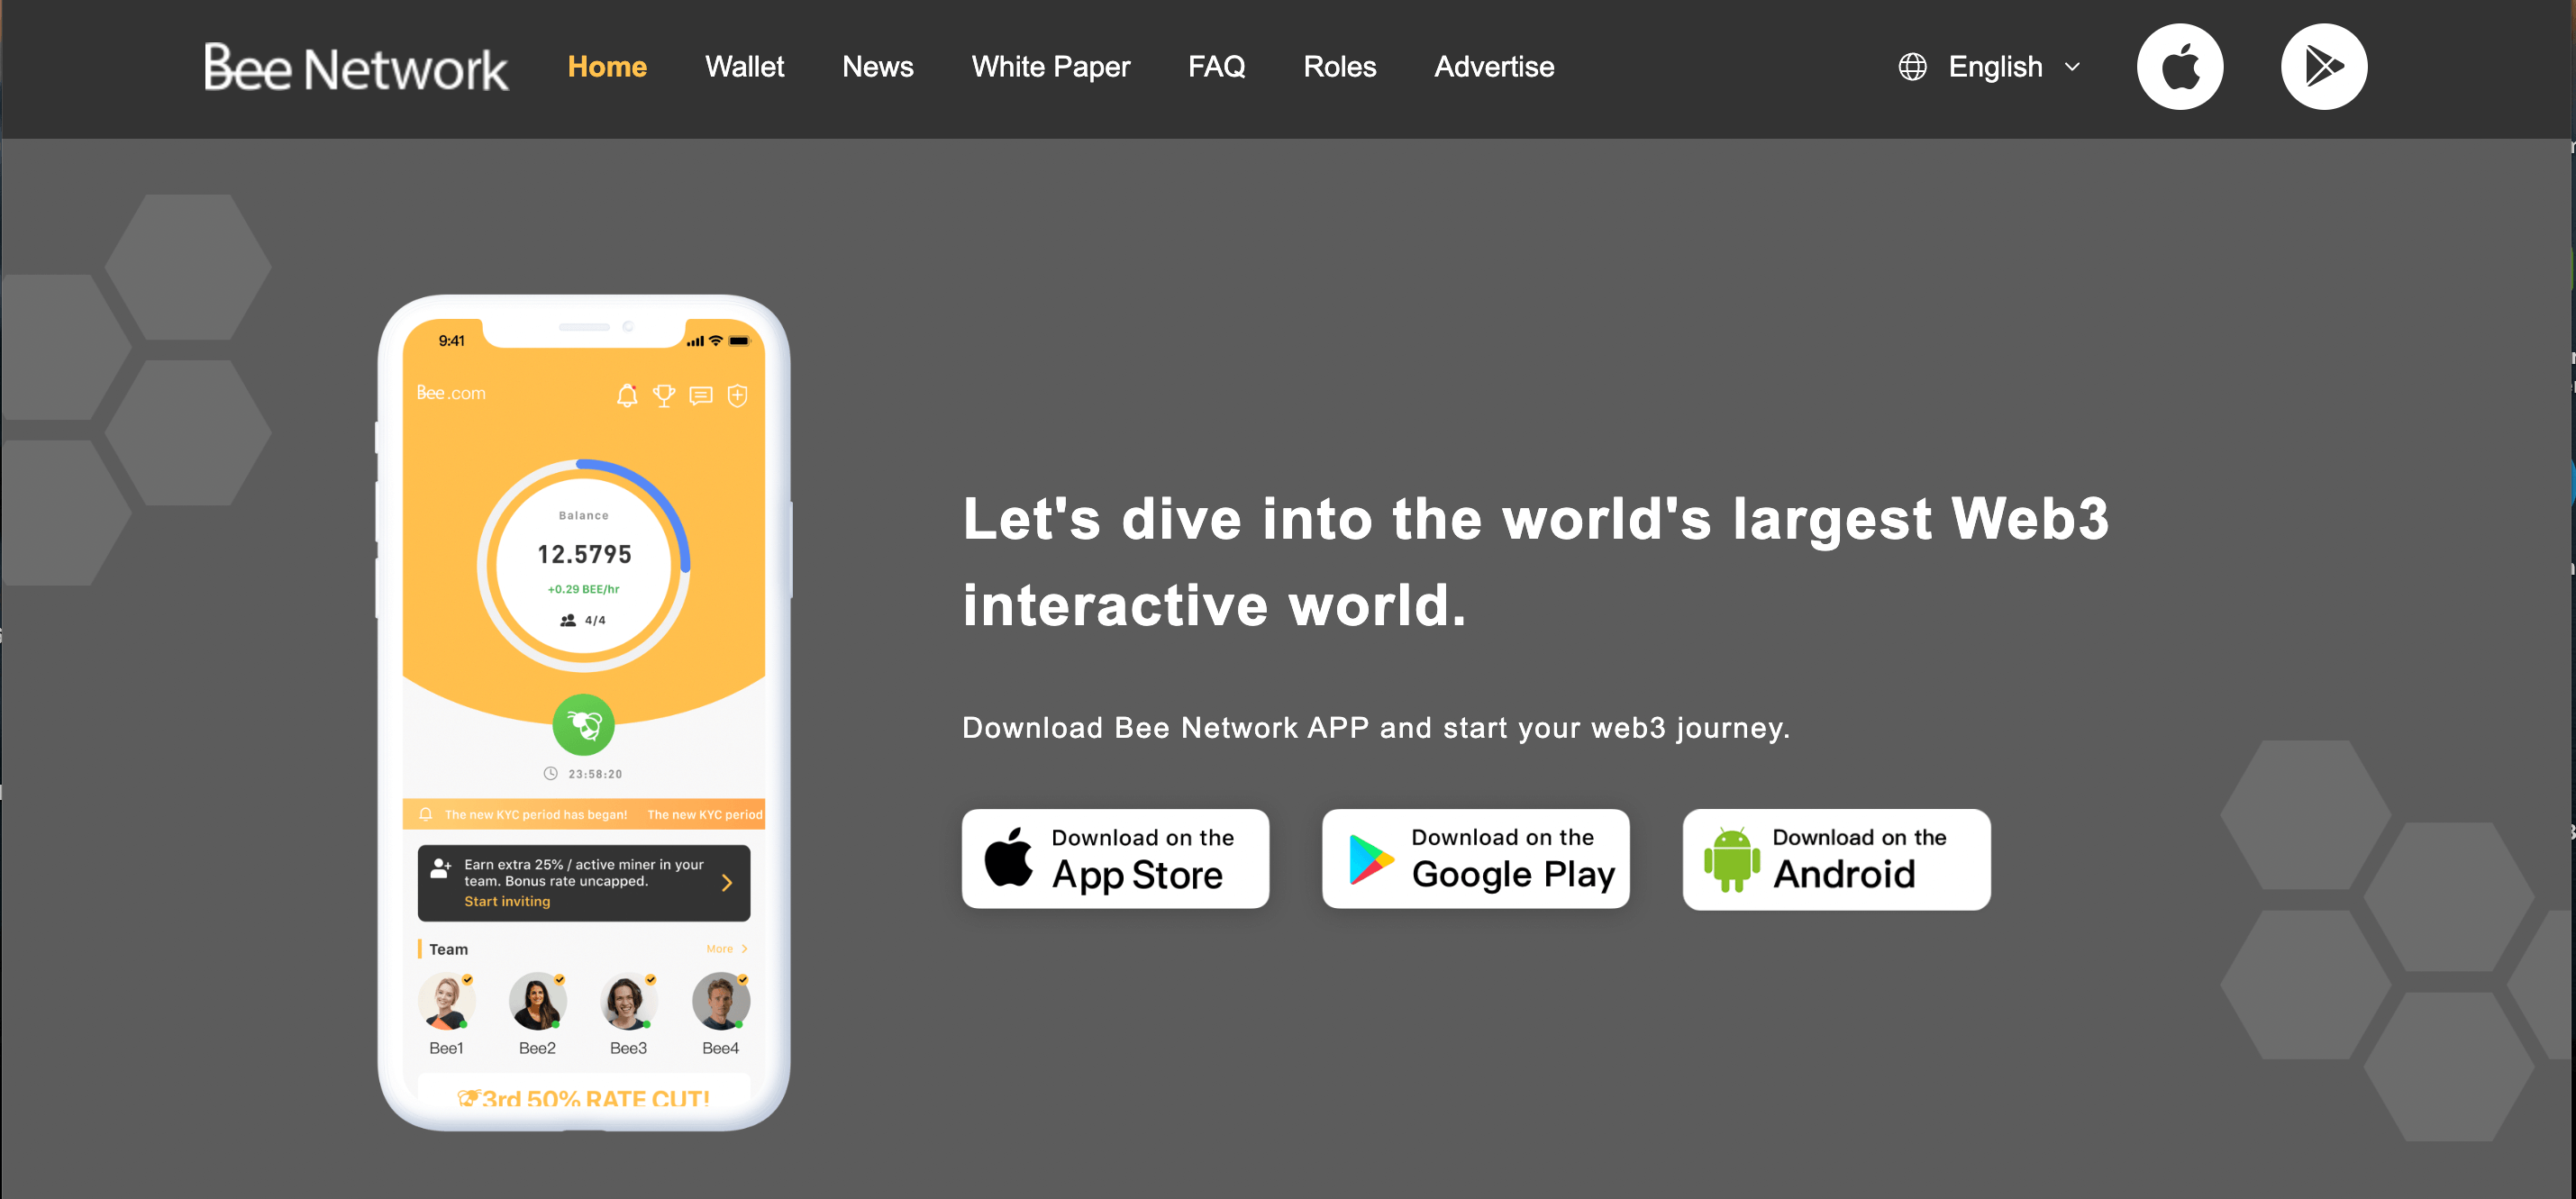 Bee Network - Download the Application